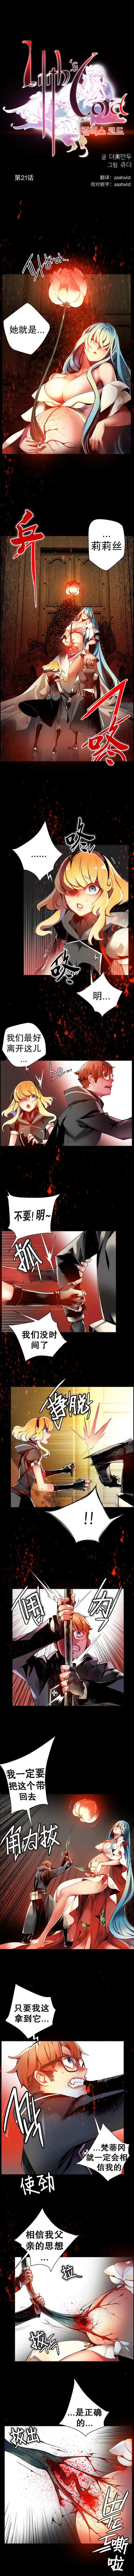 [Juder] 莉莉丝的脐带(Lilith`s Cord) Ch.1-23 [Chinese] 383